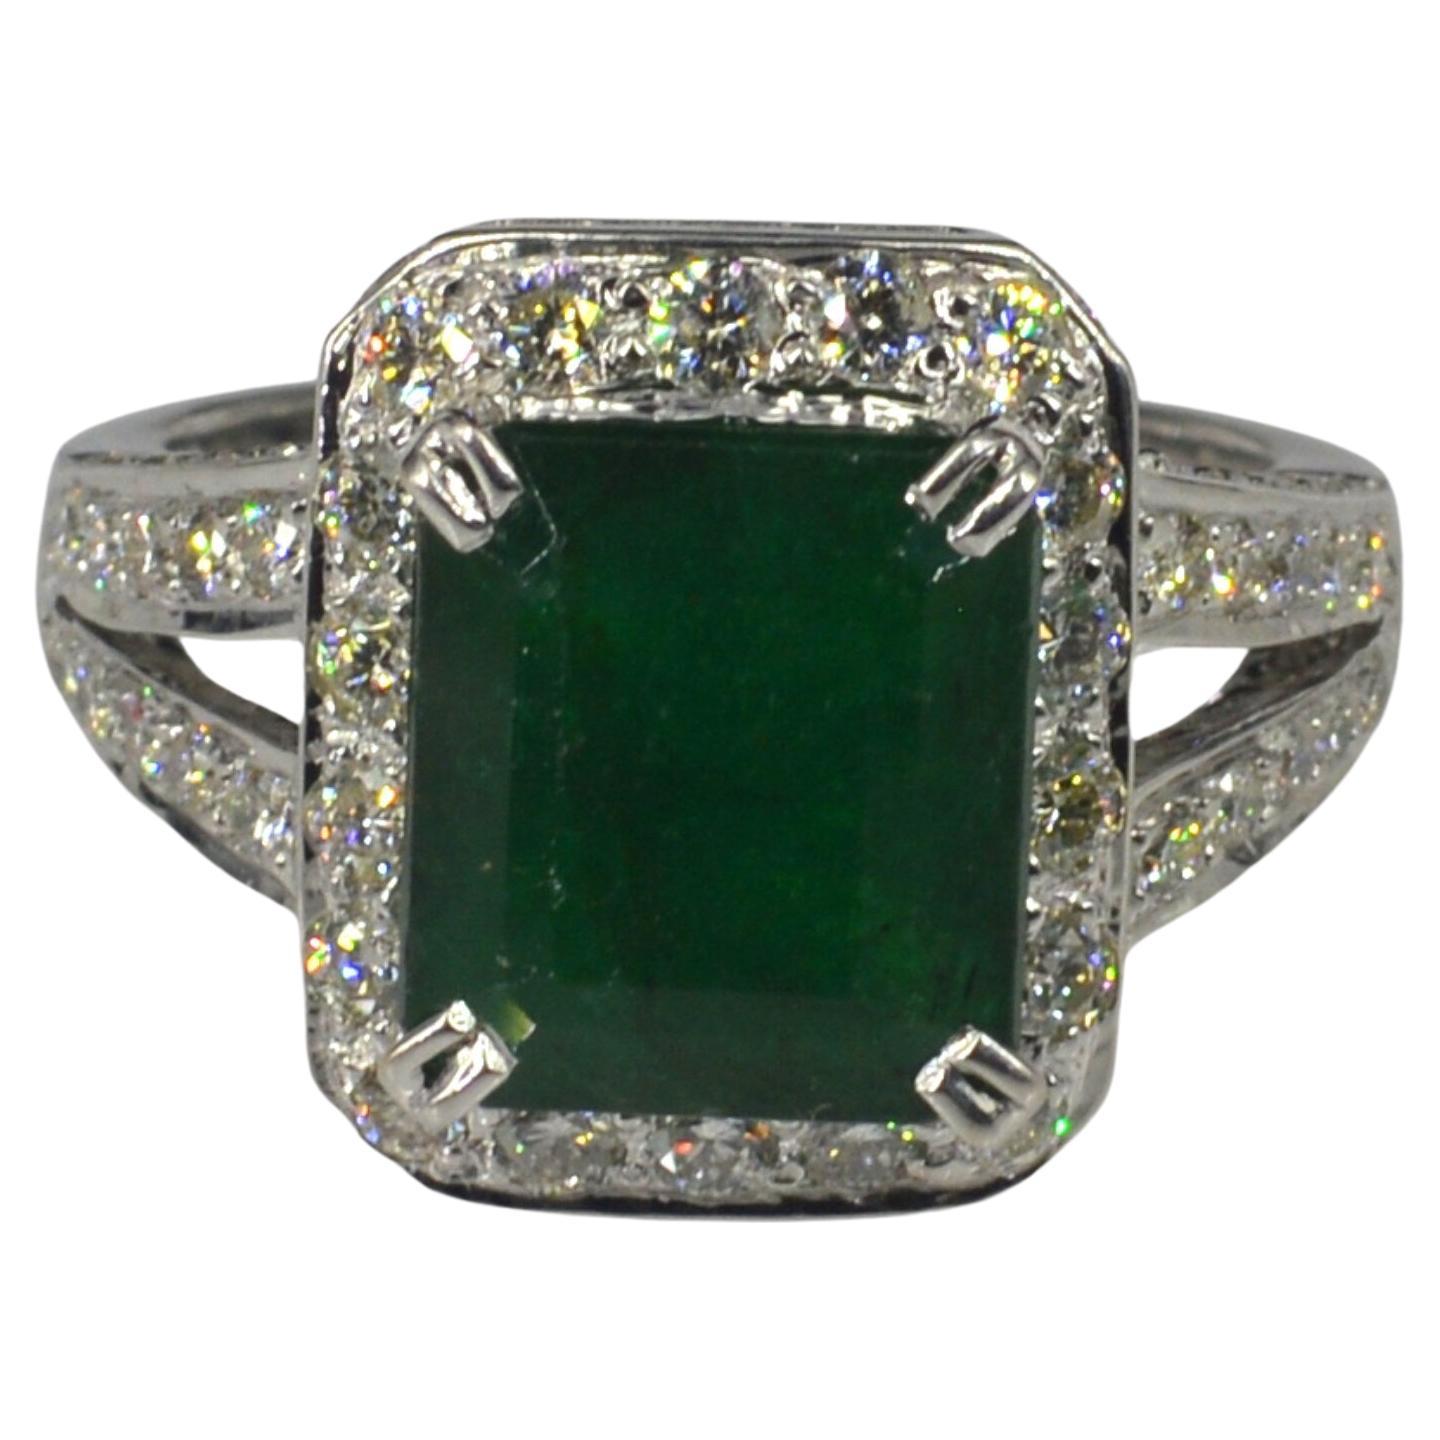 For Sale:  5 Carat Emerald Diamond Engagement Ring, Emerald Statement Ring